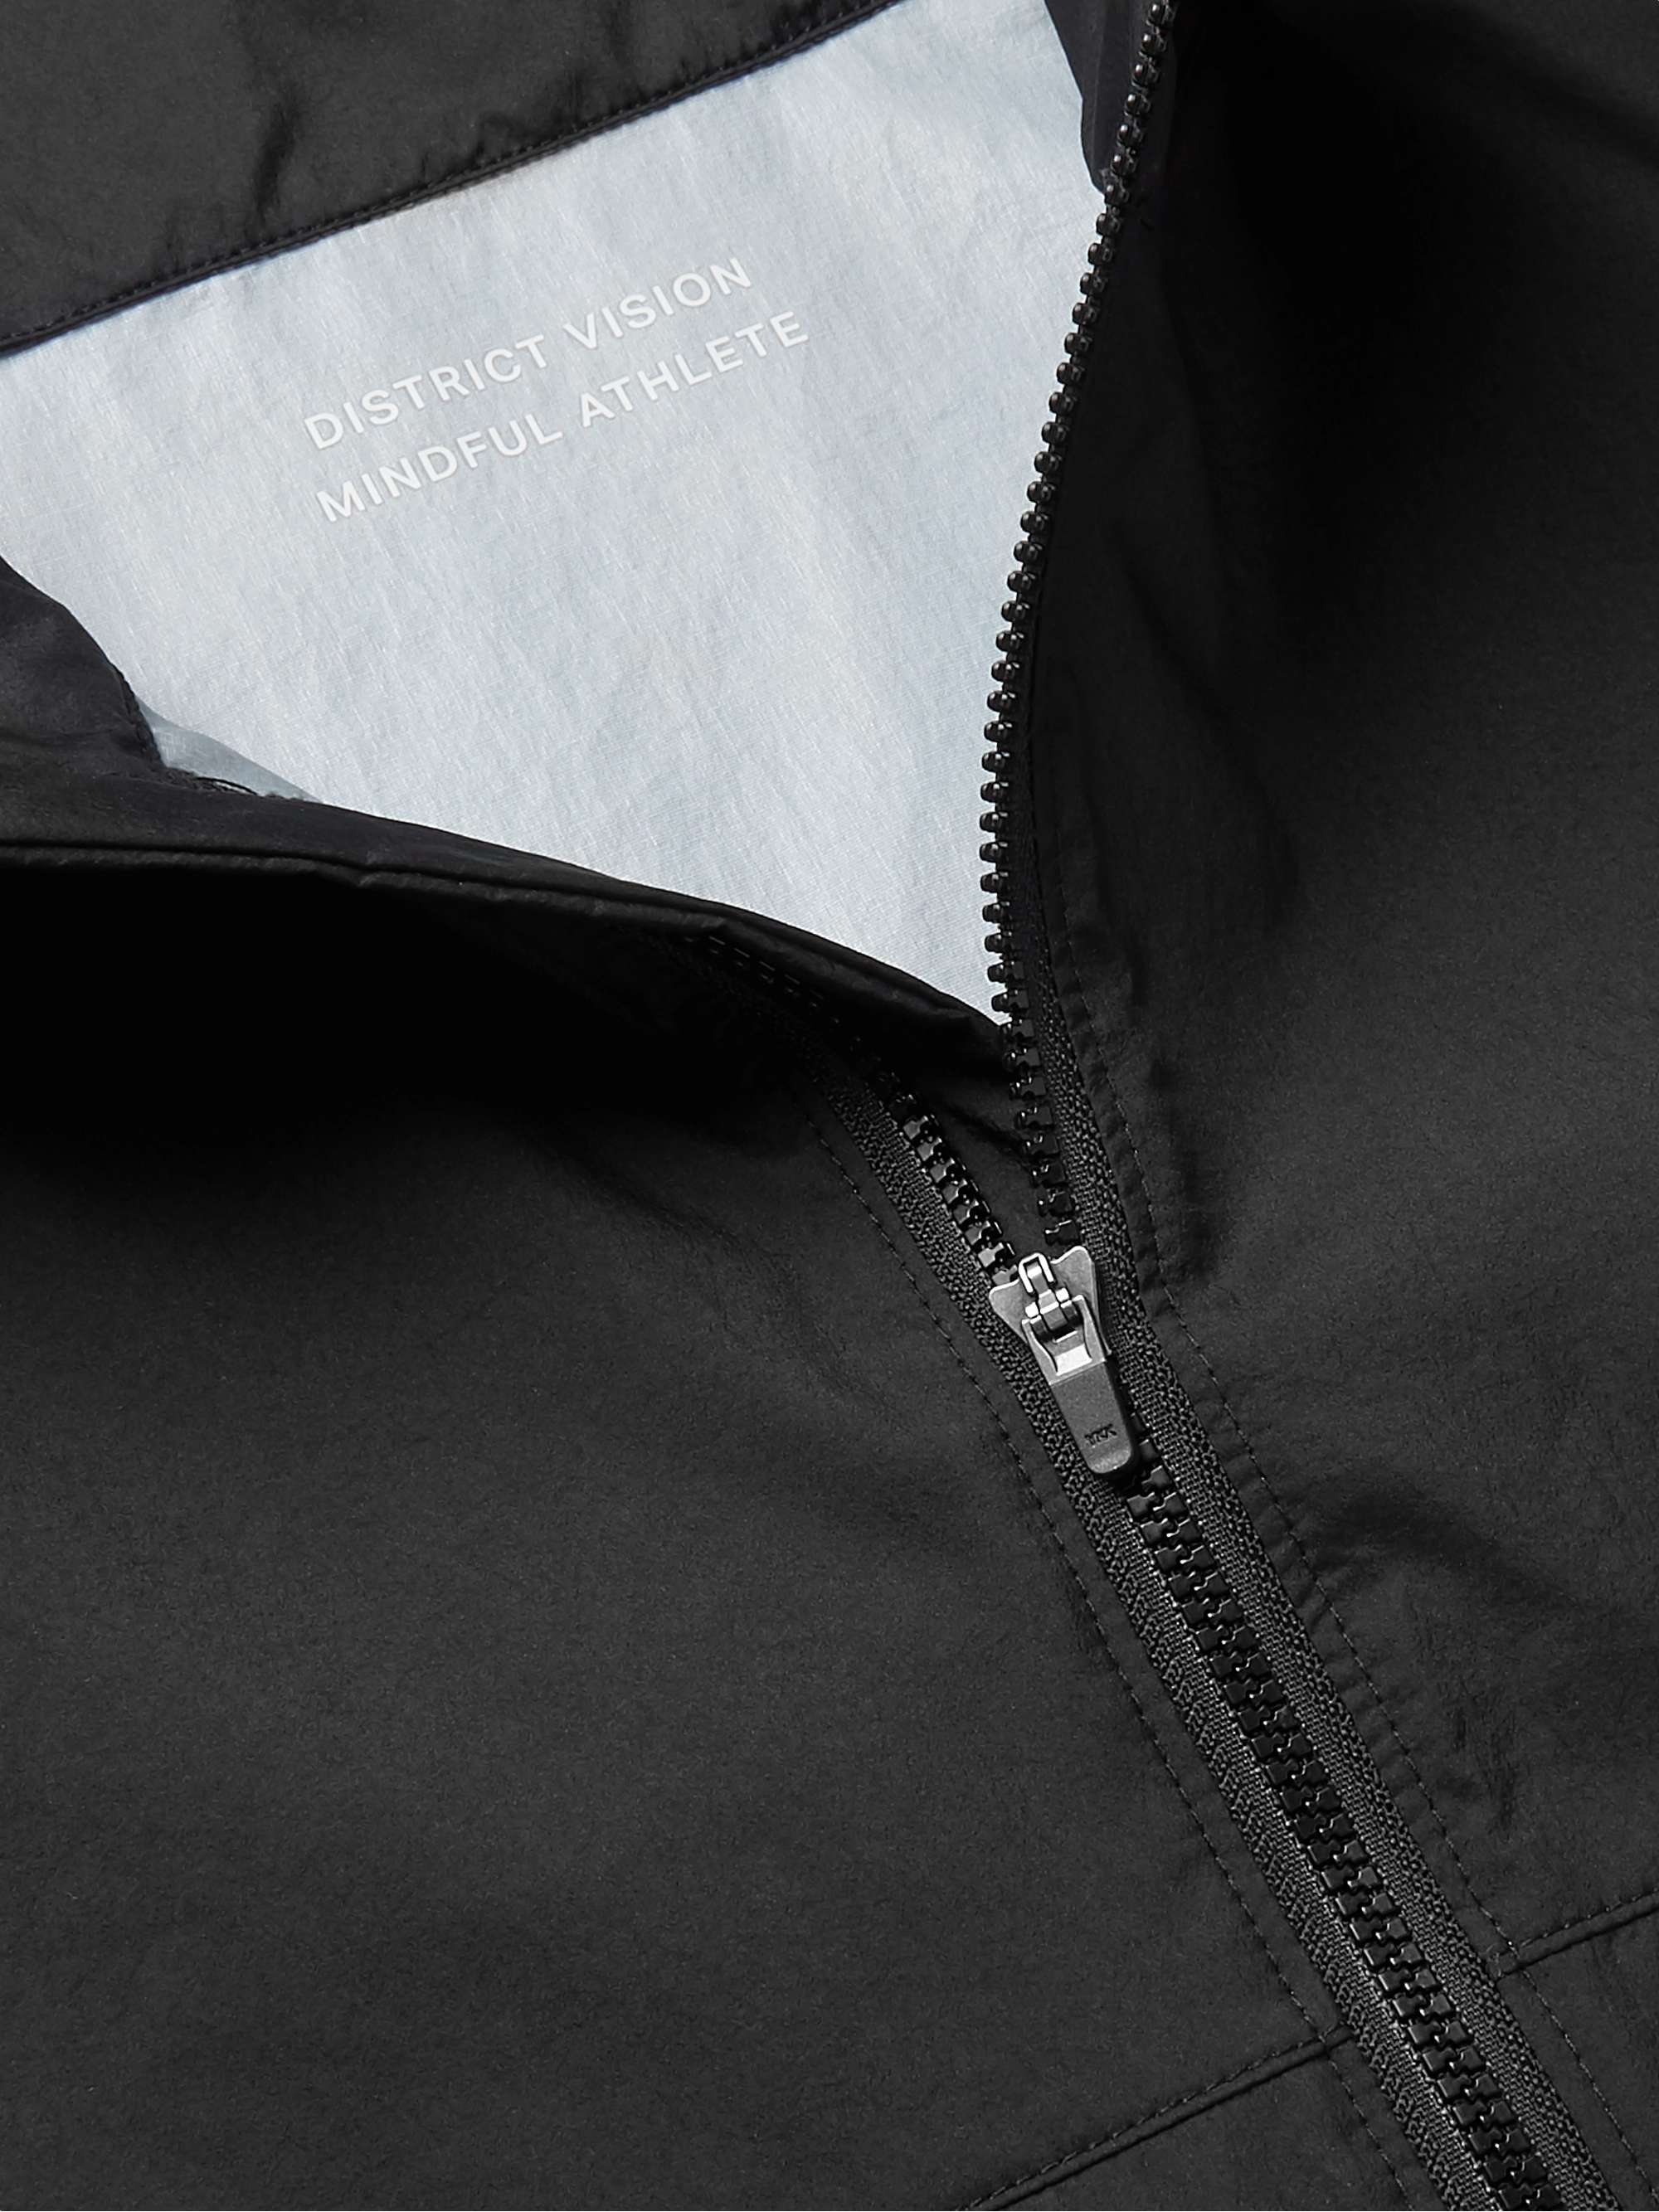 DISTRICT VISION Theo Shell Half-Zip Jacket